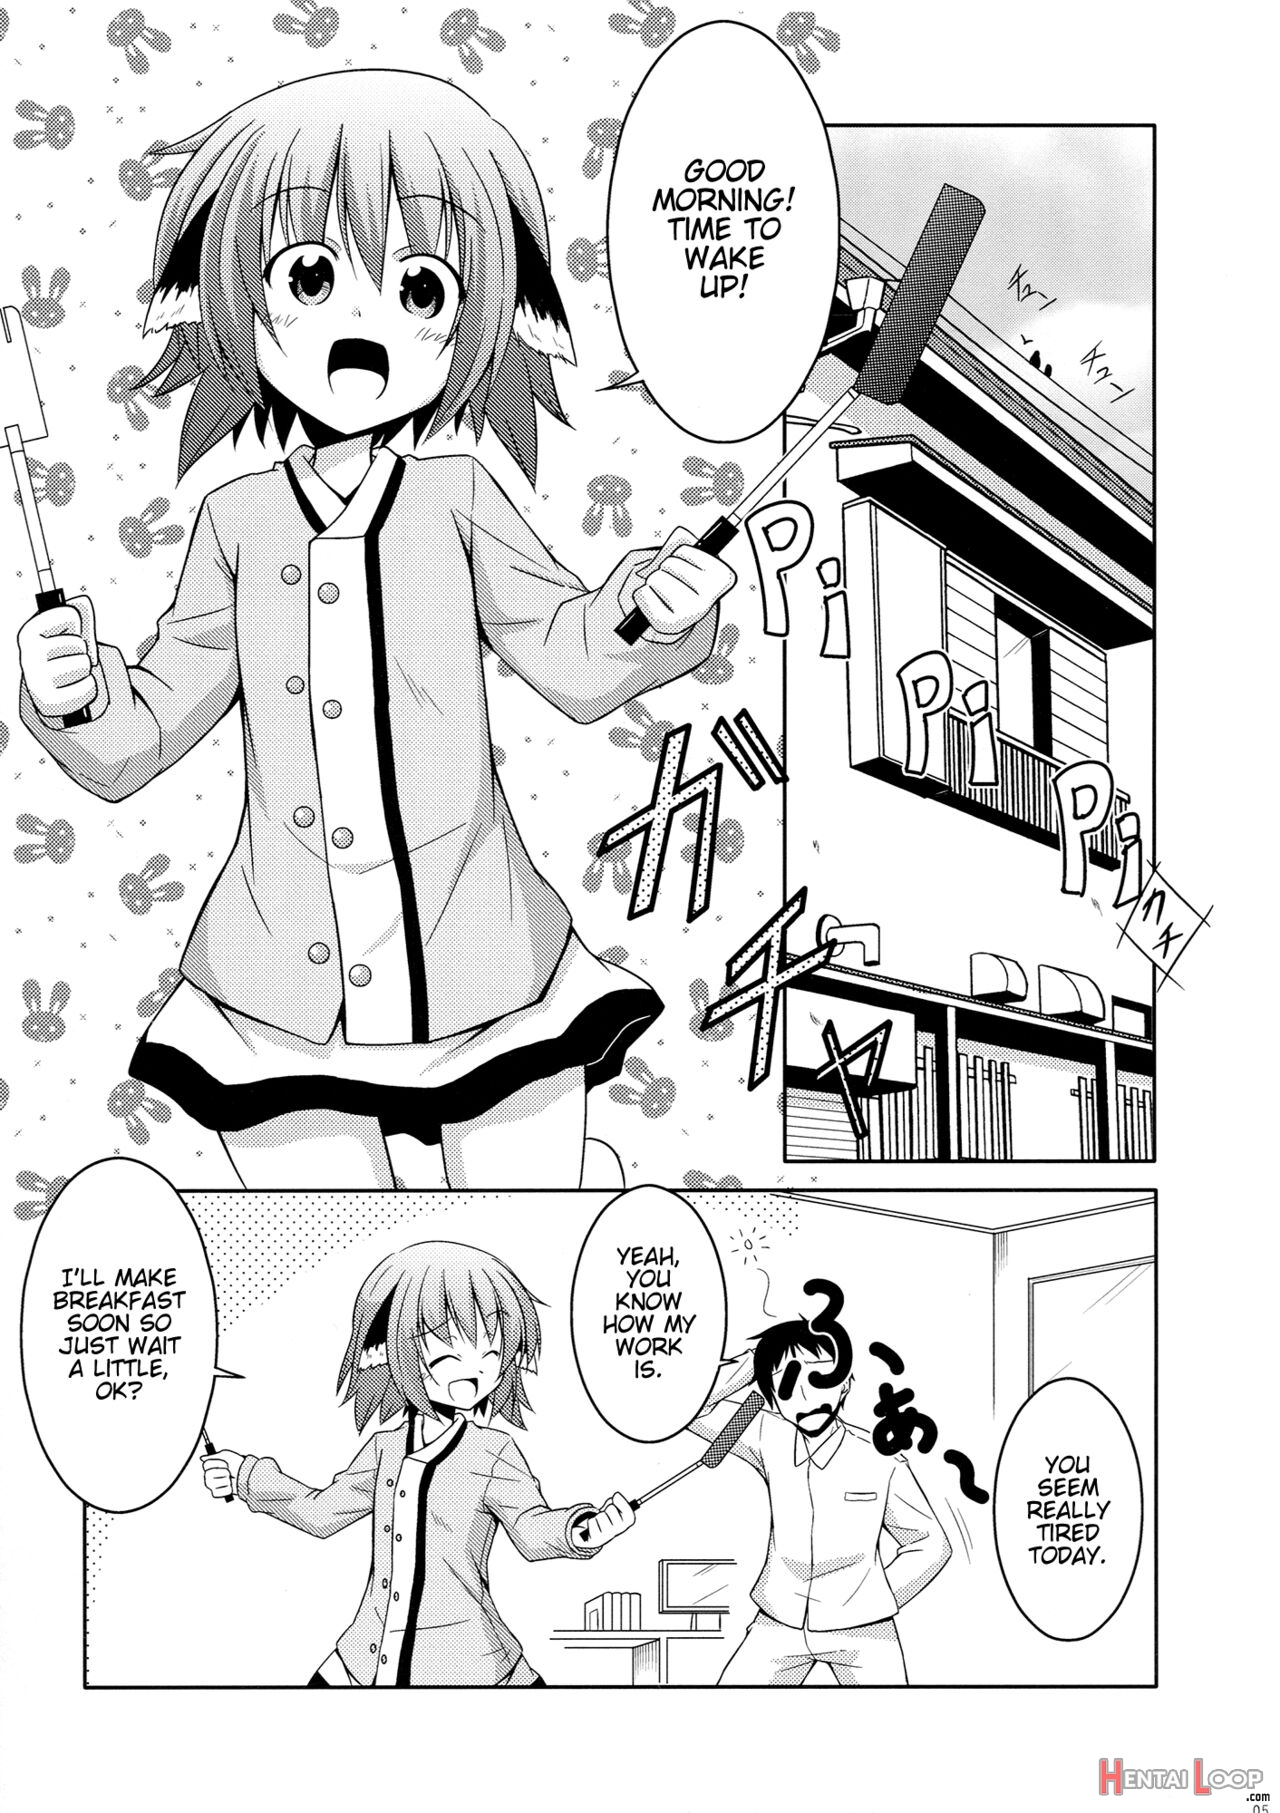 Kyouko's Daily Life page 4